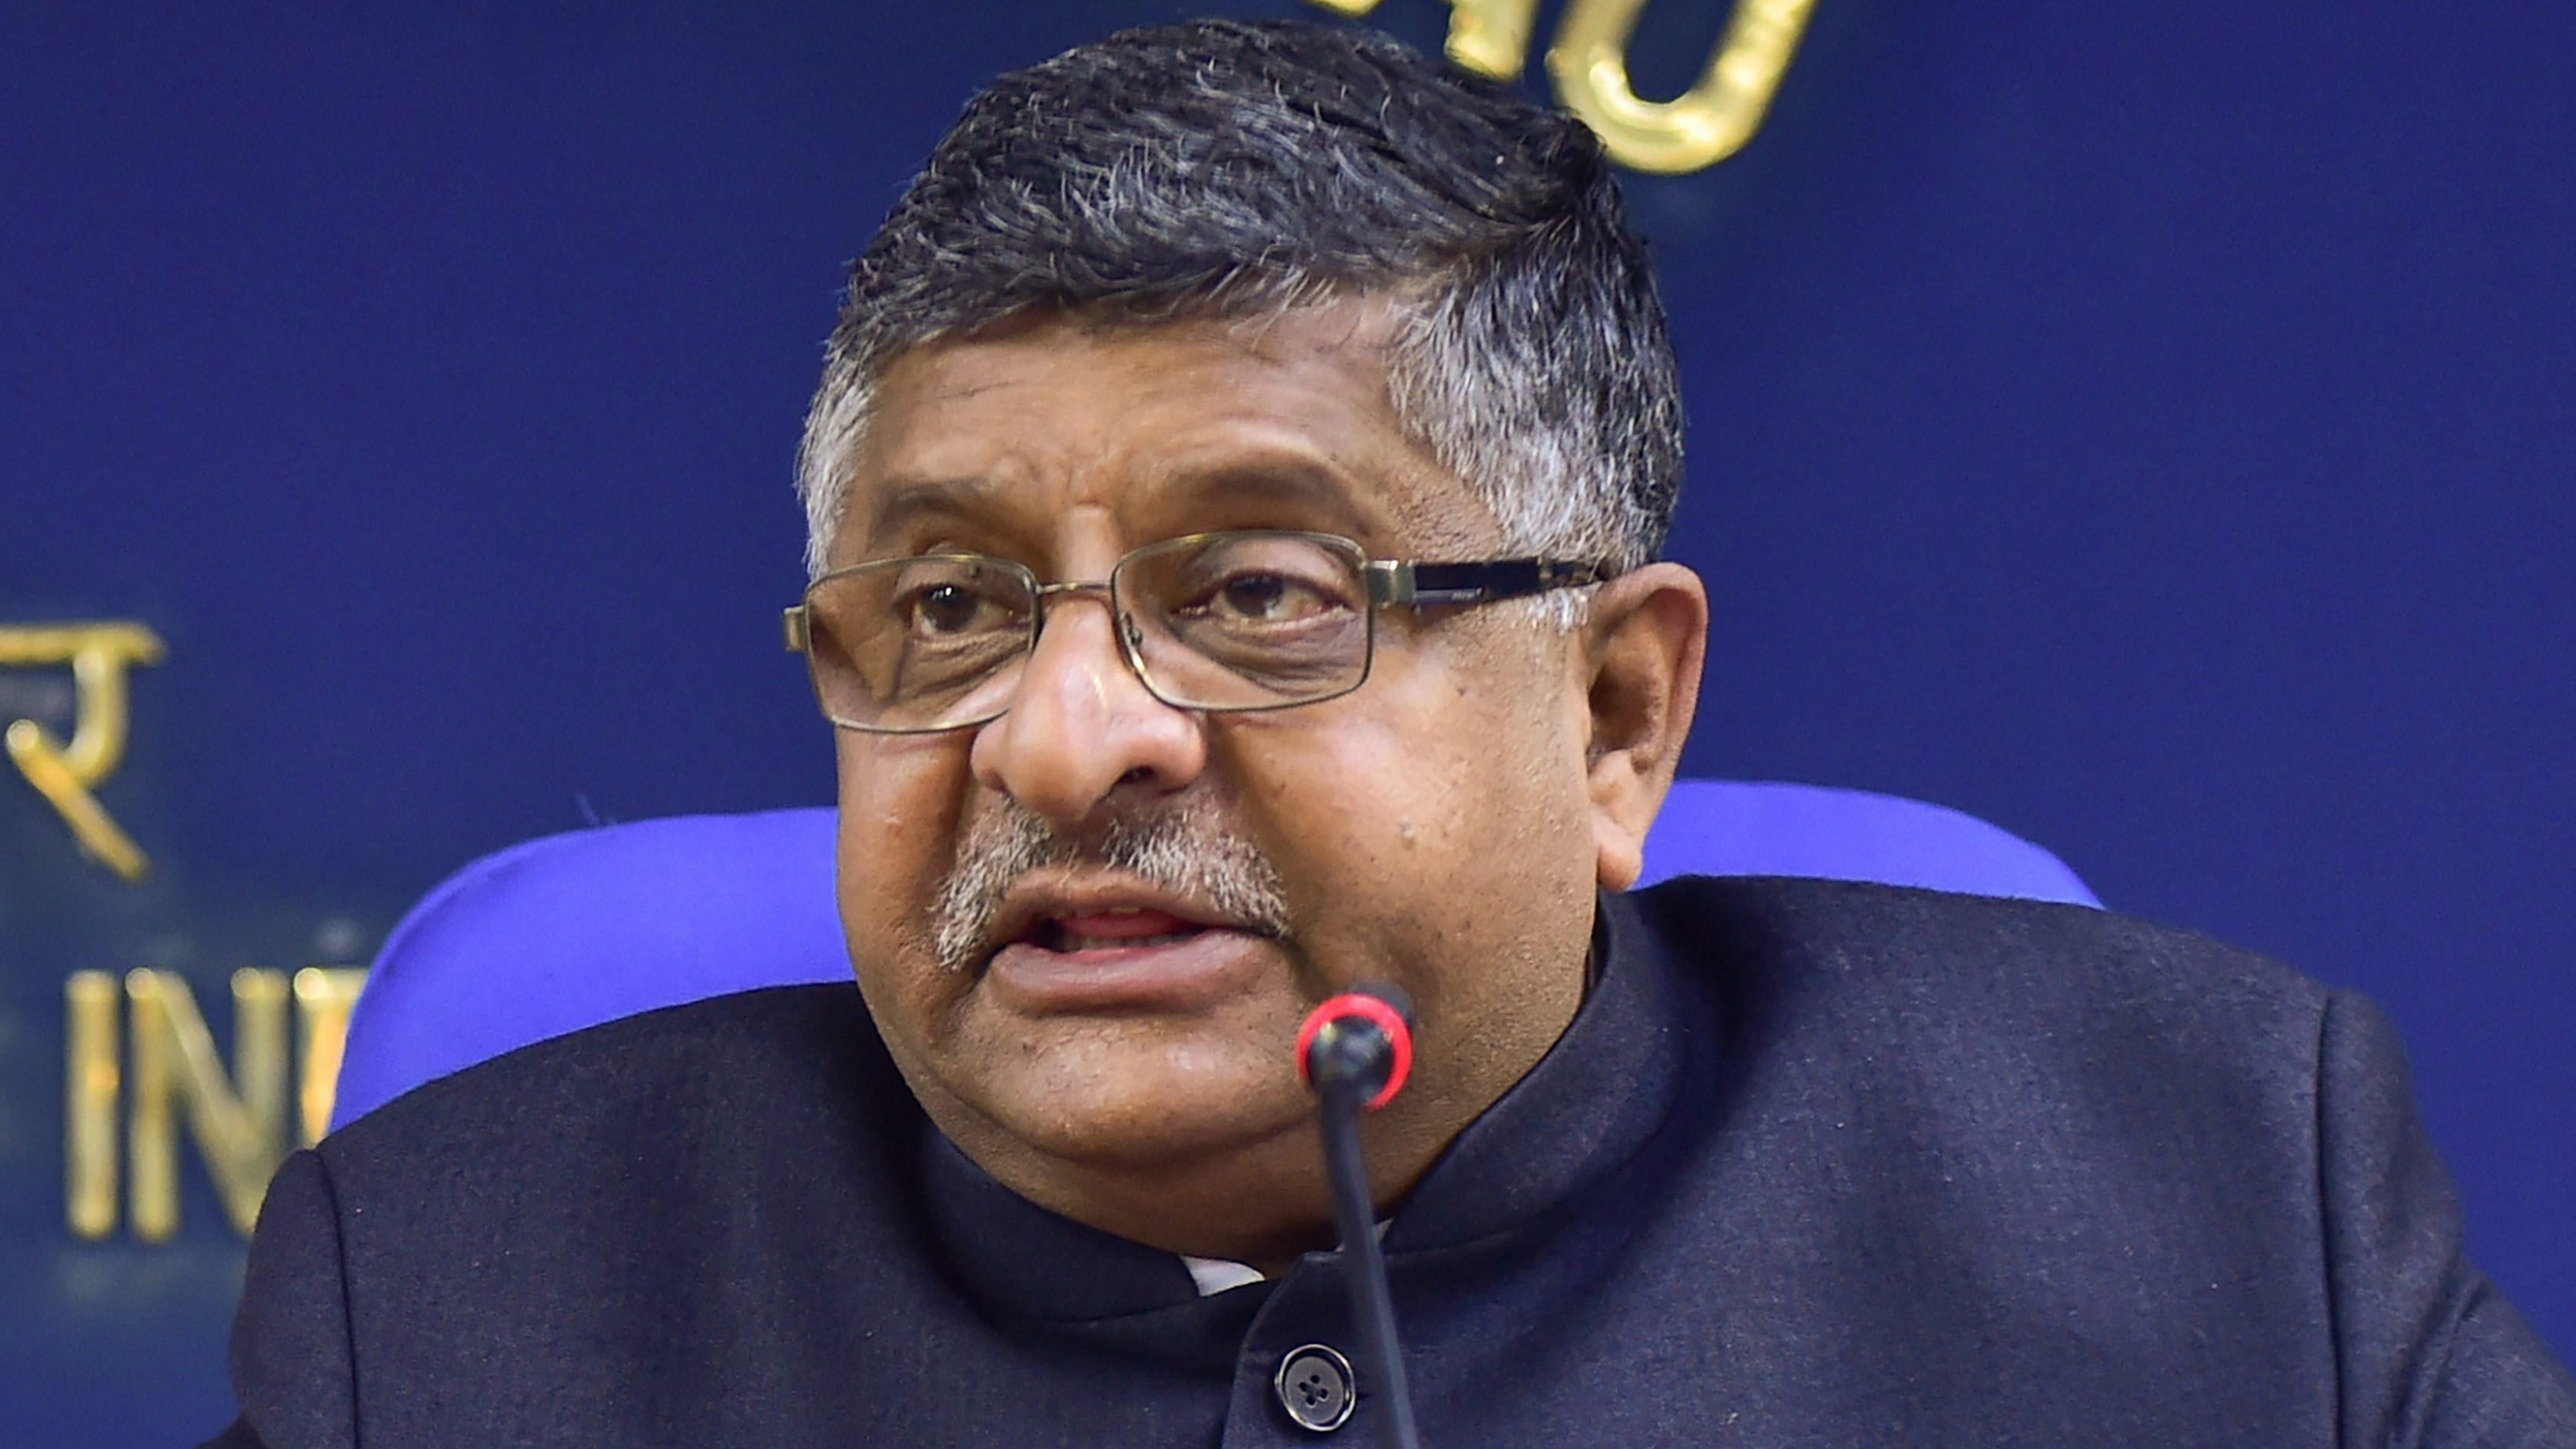 On Sunday, Ravi Shankar Prasad said: “My comments made yesterday in Mumbai about three films making Rs 120 crore in a single day, the highest ever, was a factually correct statement. I had stated this as I was in Mumbai, the film capital….